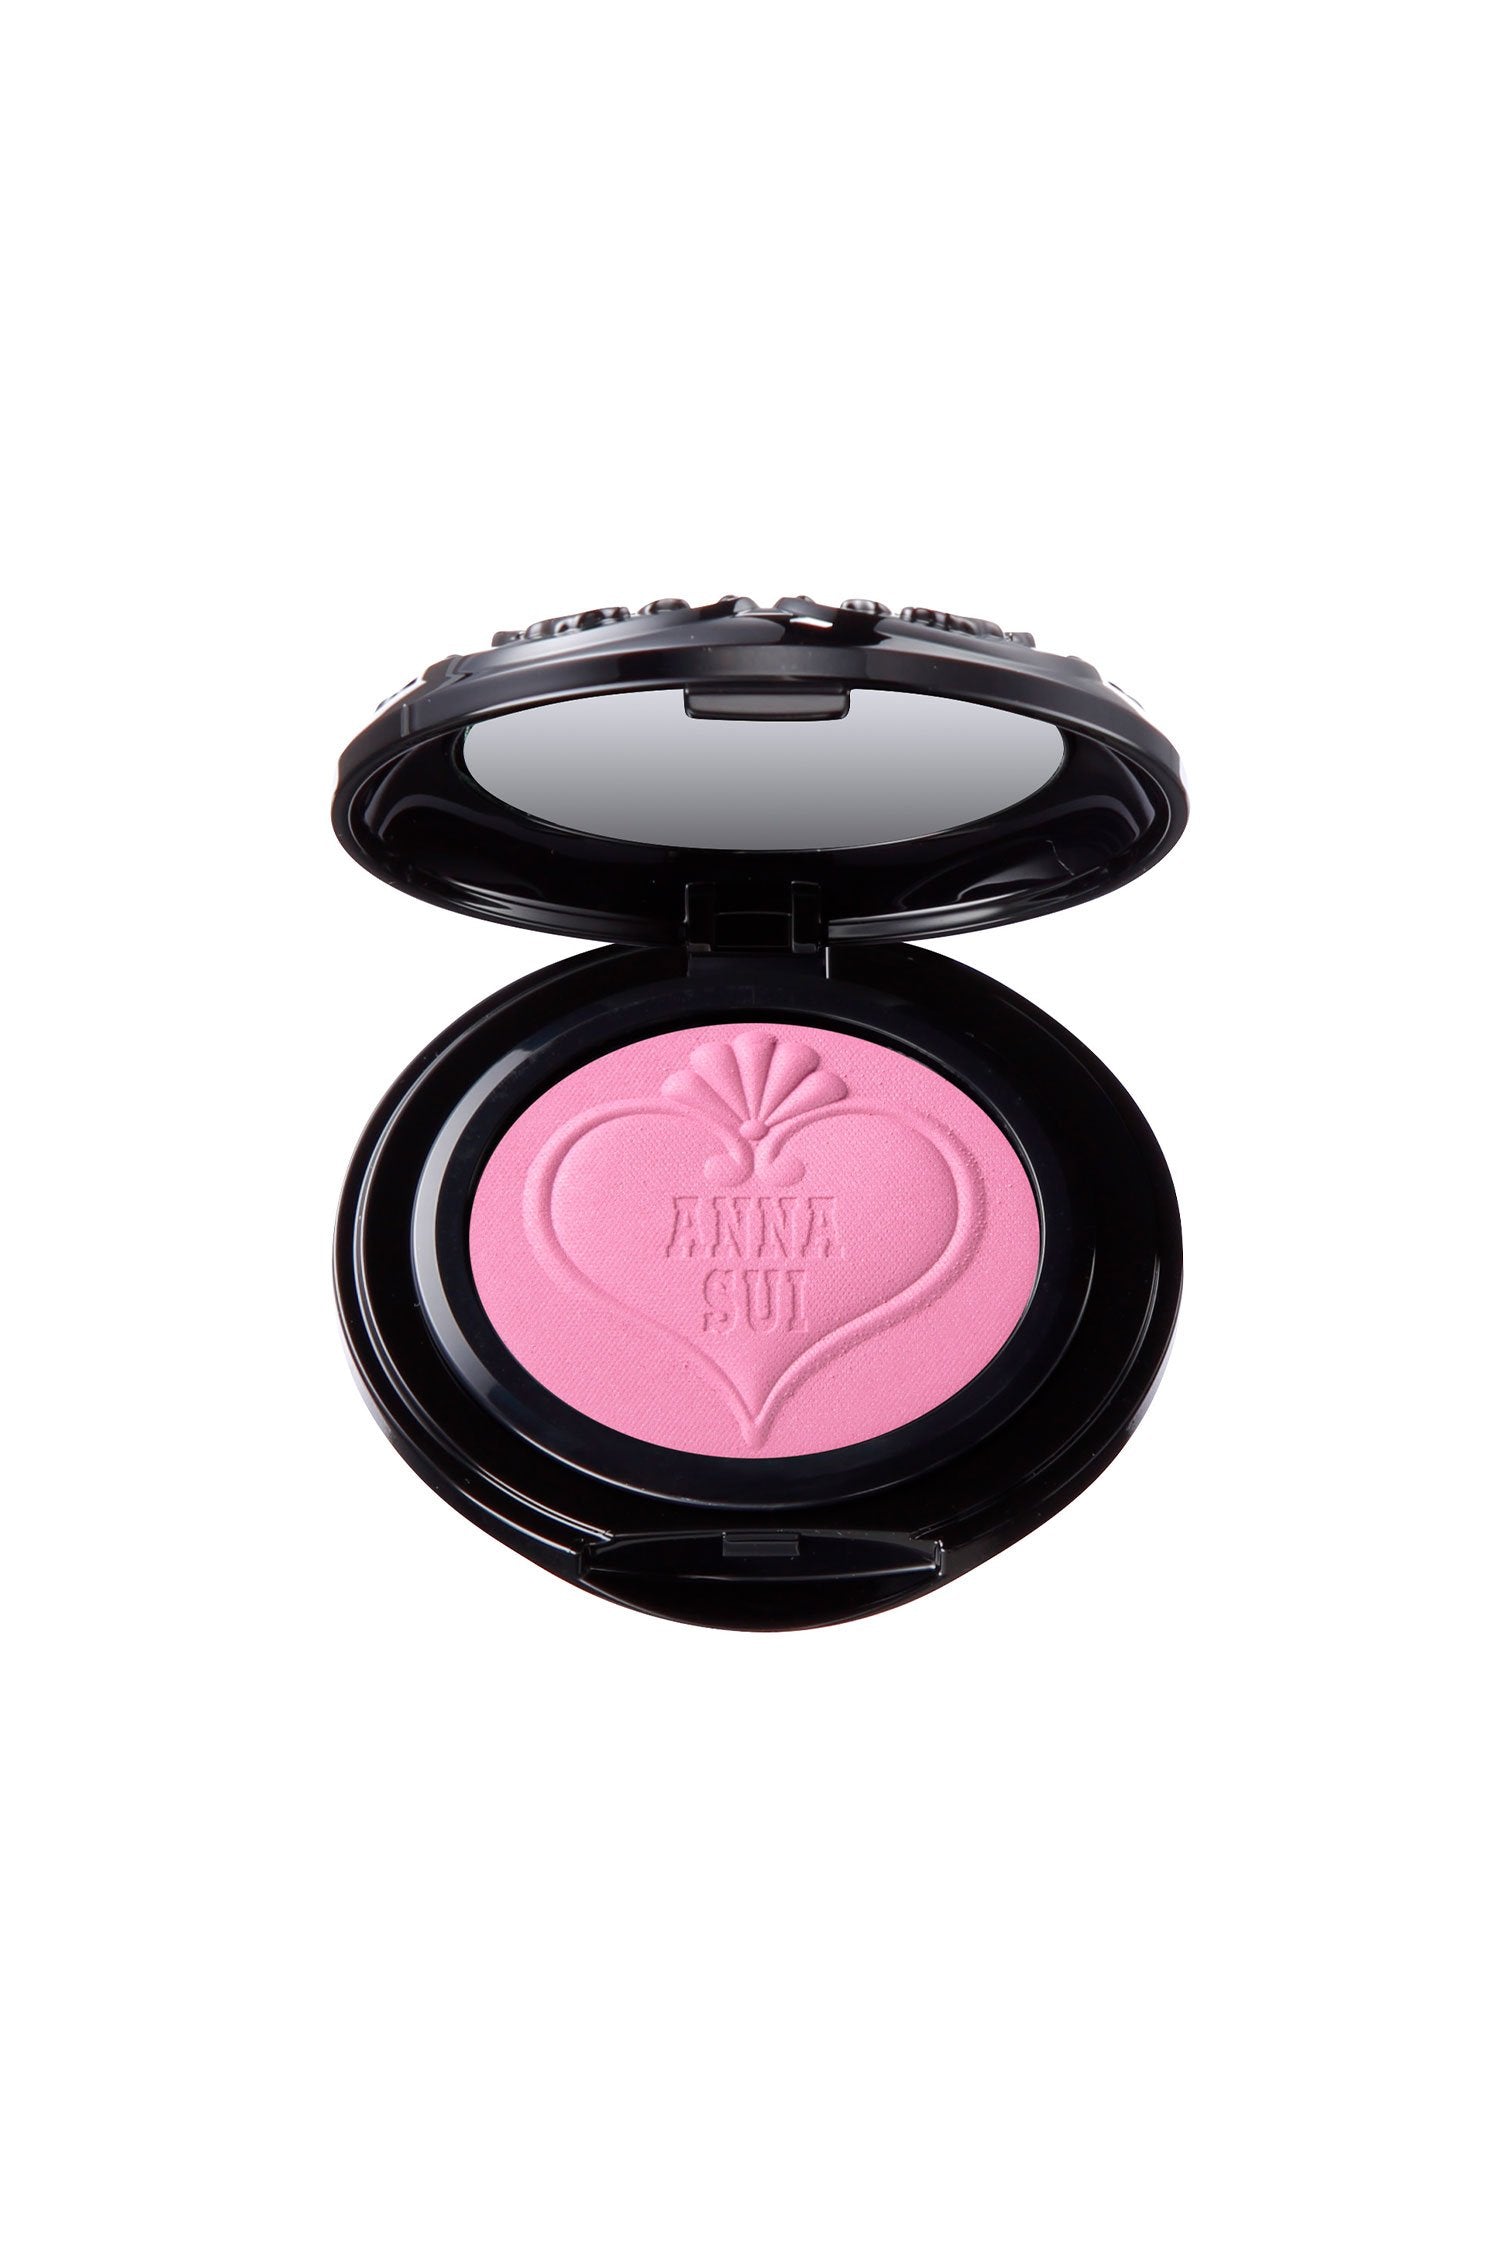 The gorgeous 301 - Rich Coral in is rounded black container with a mirror in the top lid.